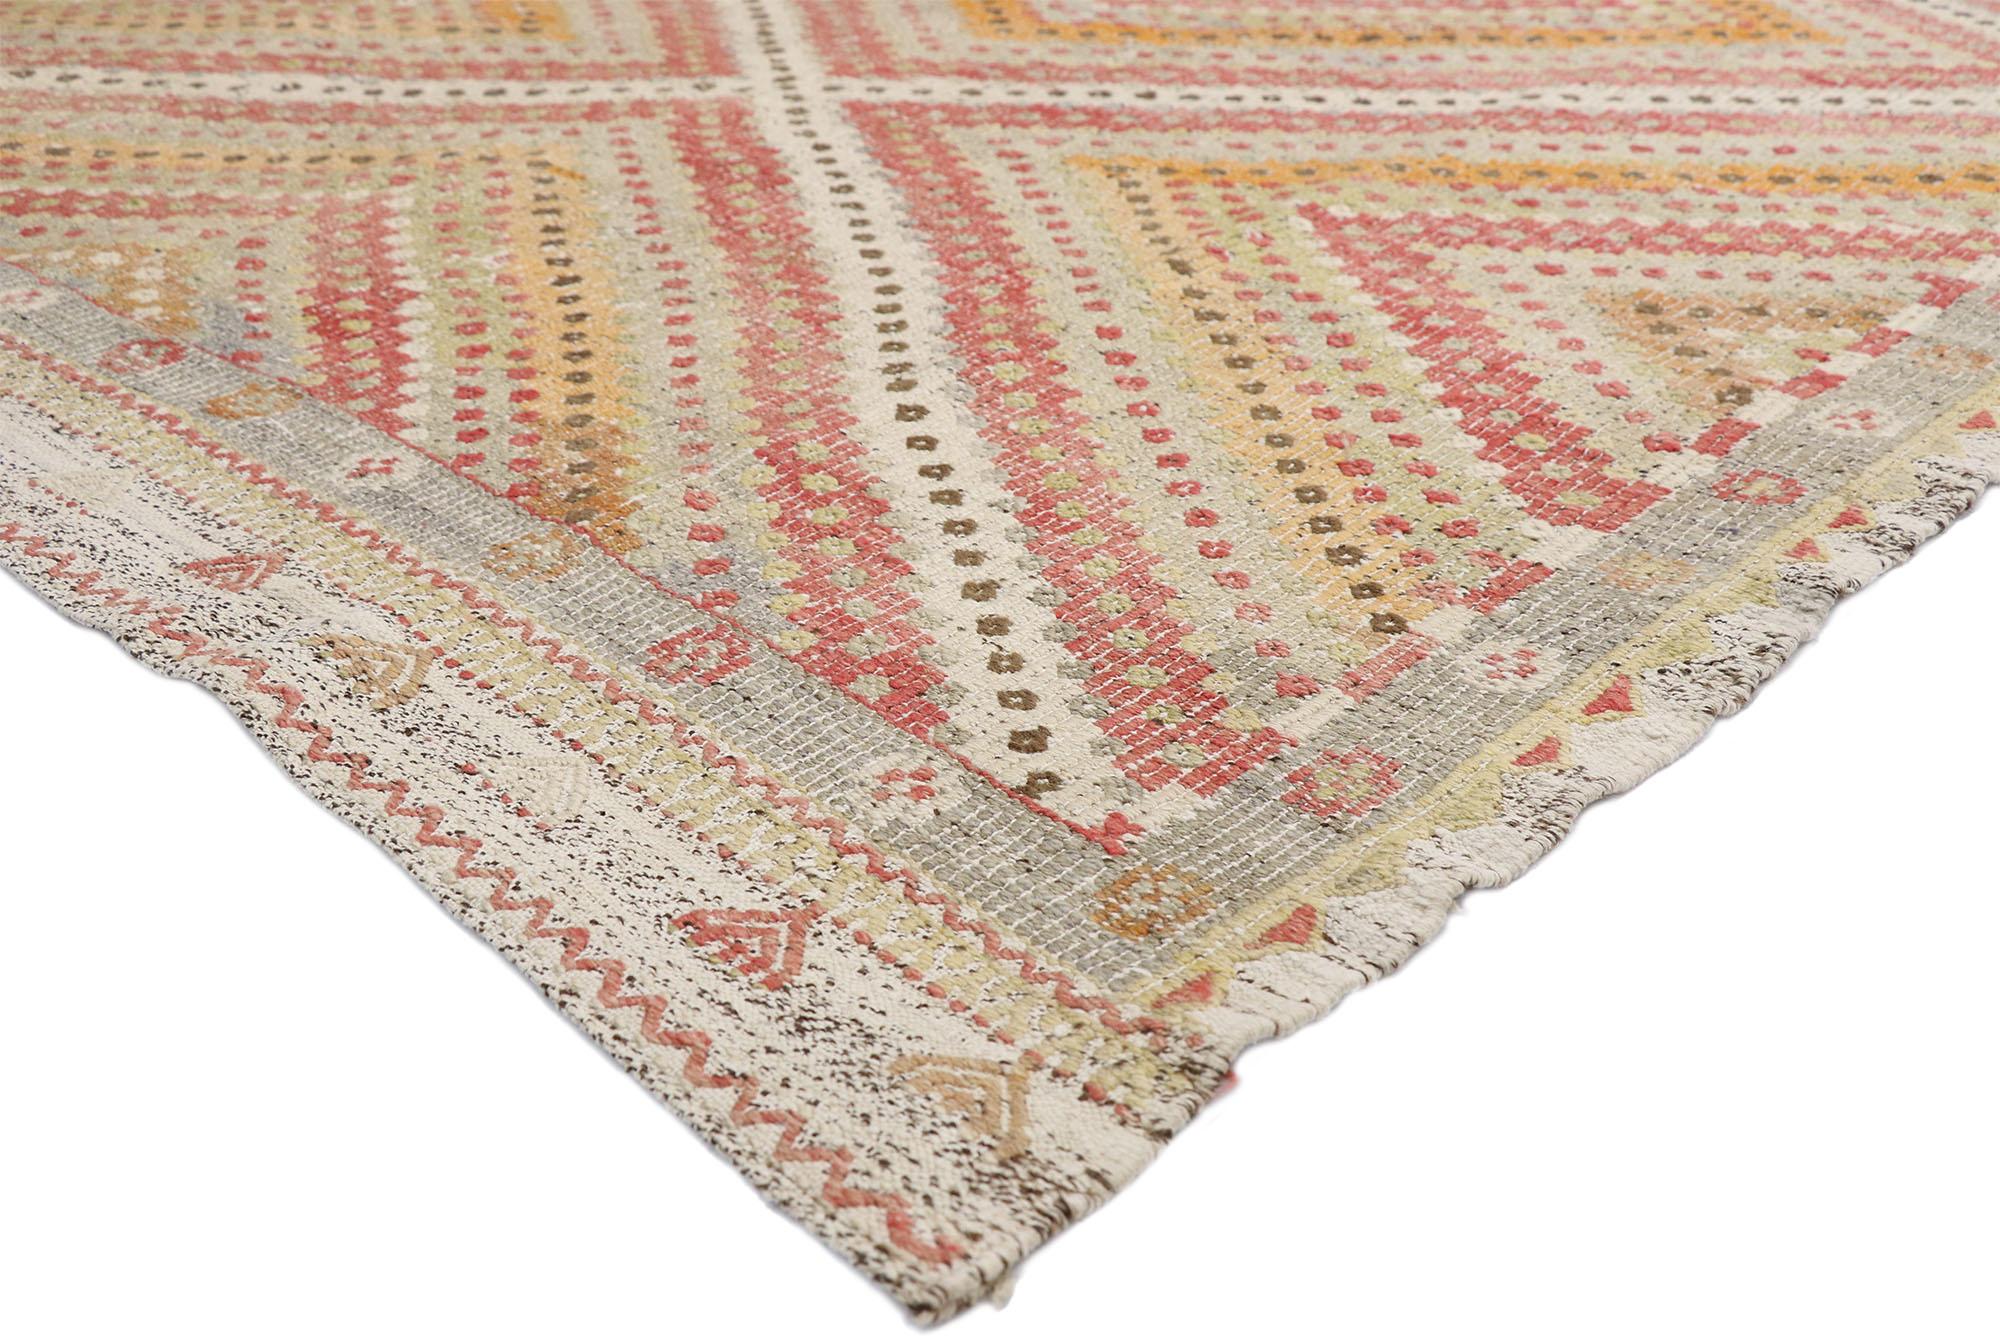 52561, distressed vintage Turkish Kilim rug with Southern Living British Colonial style. This handwoven wool vintage Turkish Kilim rug features a central diamond surrounded by additional striped bands creating an Expansion effect for the main